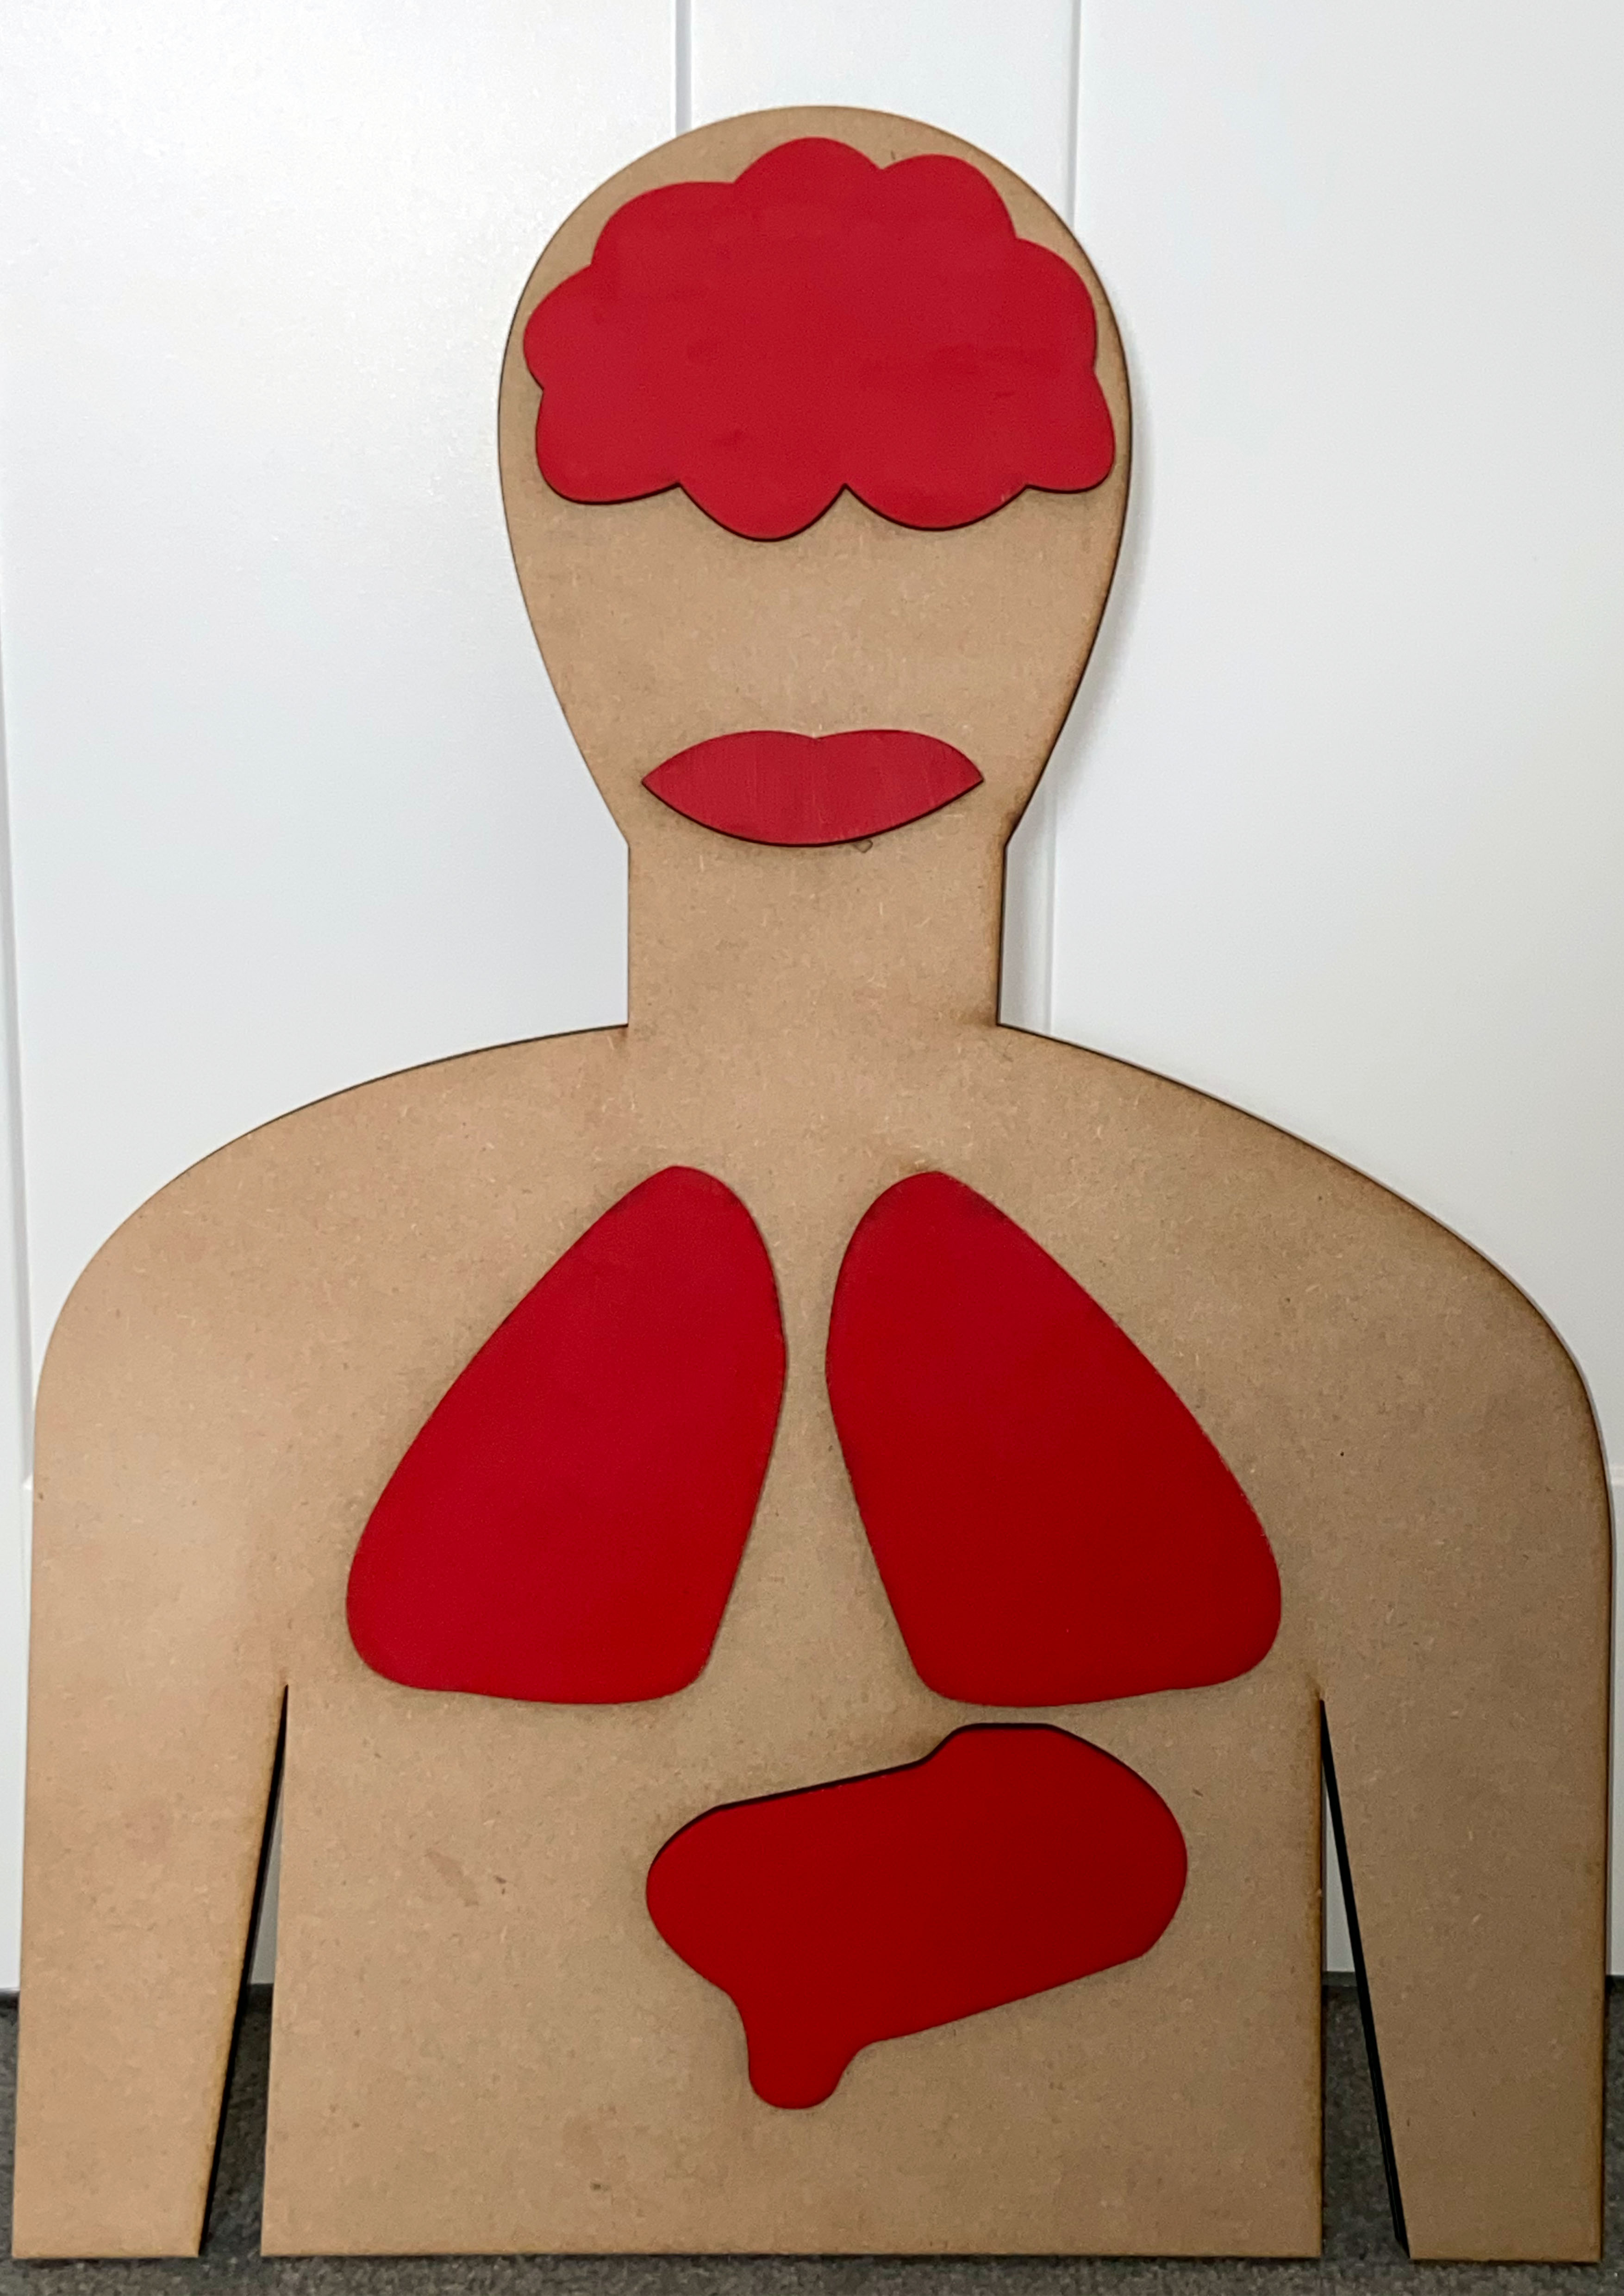 A;exander's artwork - a 3D anatomy of stammering in the body